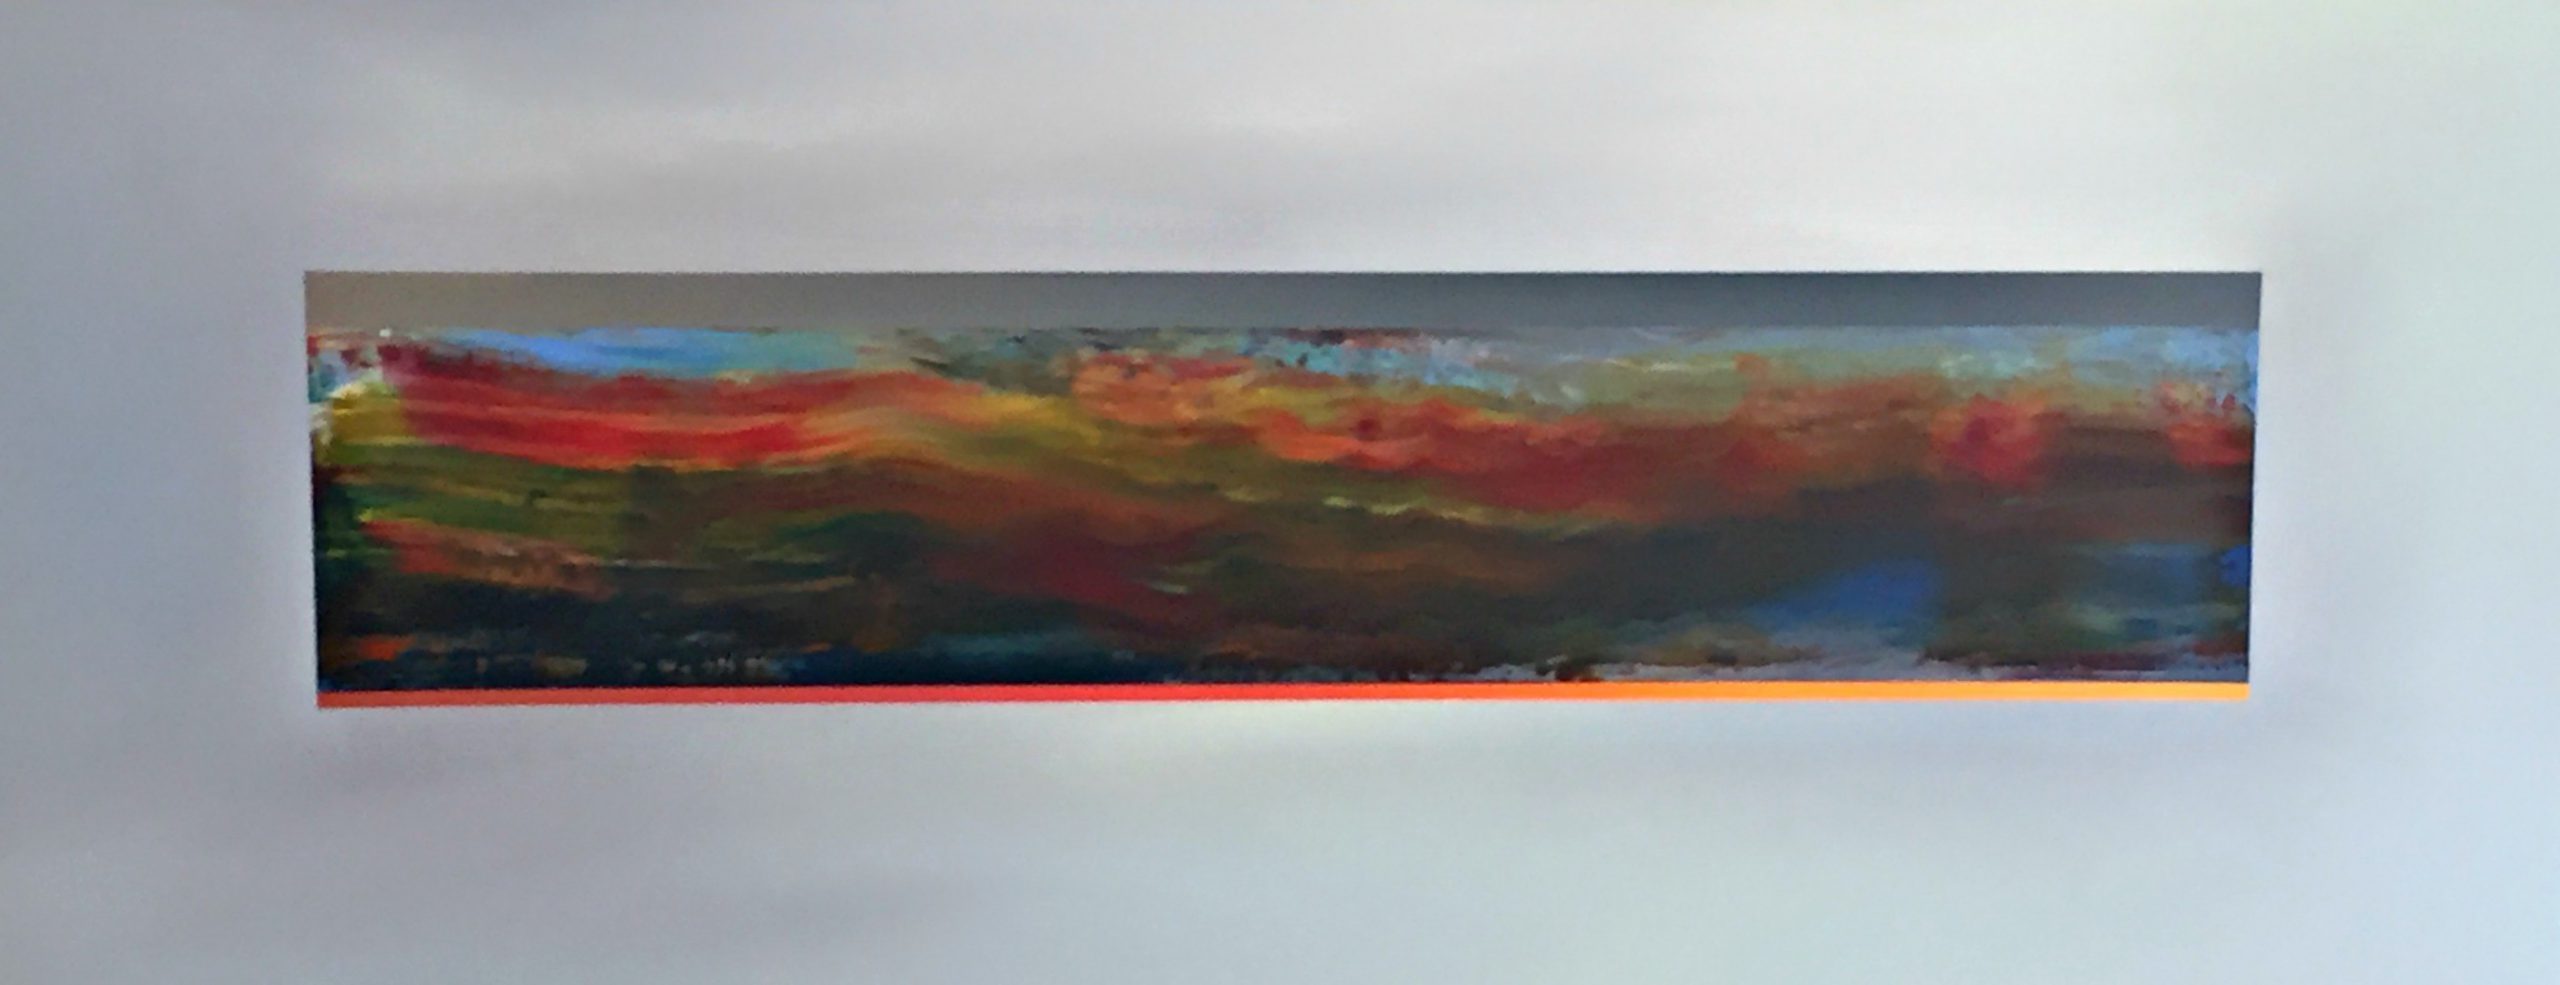 Internal Wave, acrylic painting by Joel Masewich | Effusion Art Gallery + Cast Glass Studio, Invermere BC